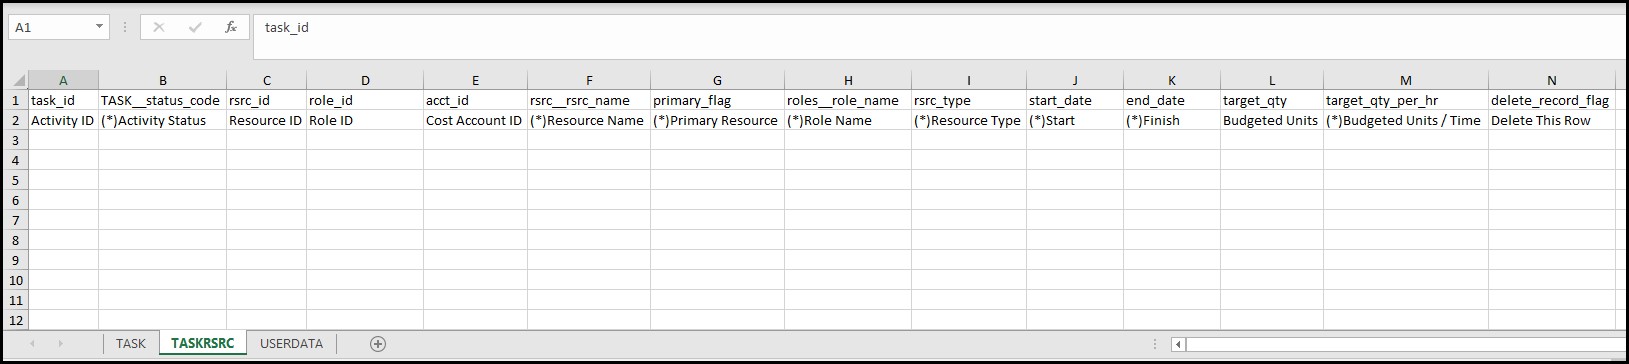 Exported Spreadsheet from P6